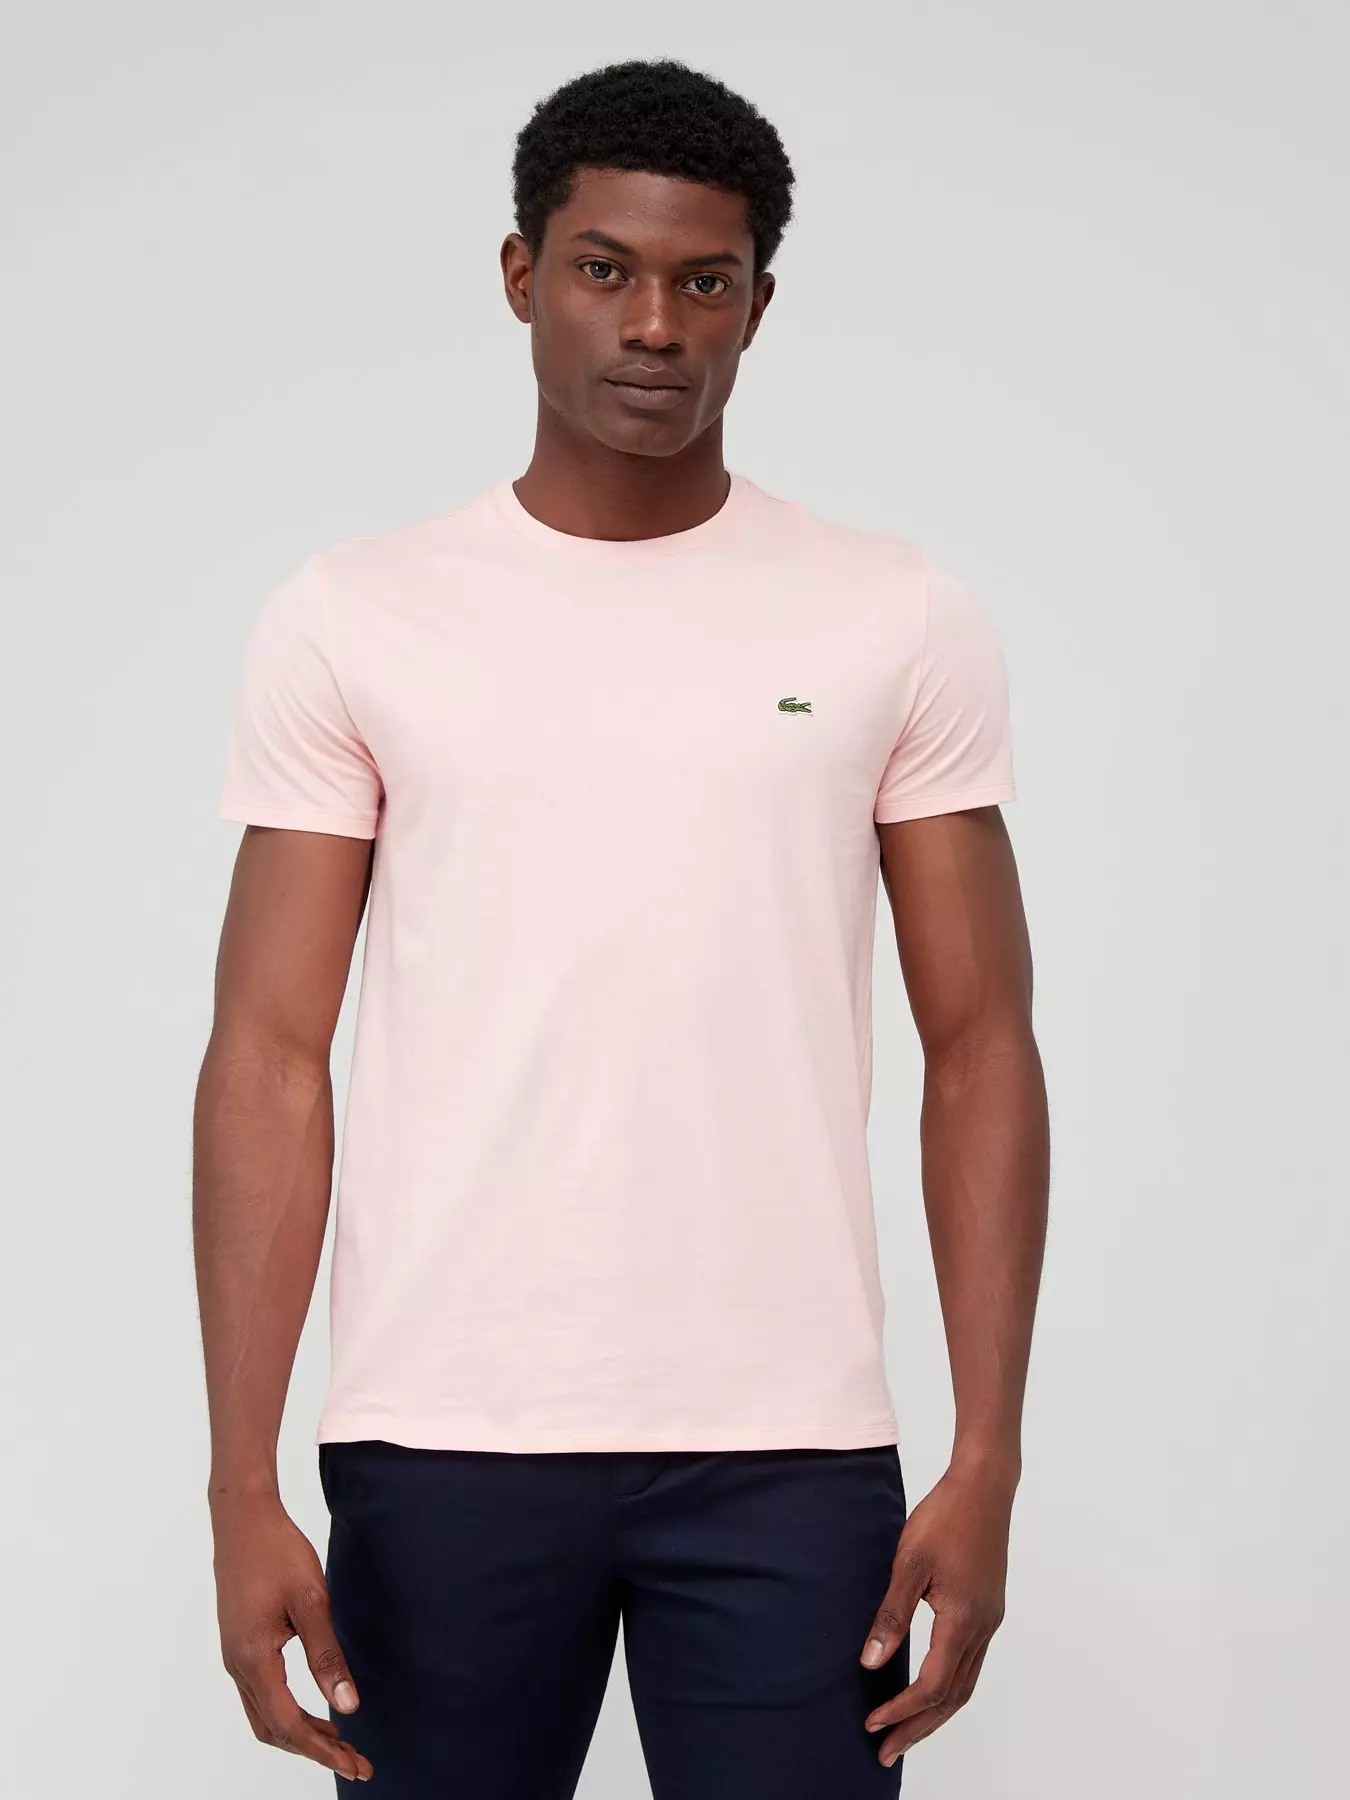 River Island Muscle Fit T-Shirt In Bright Pink